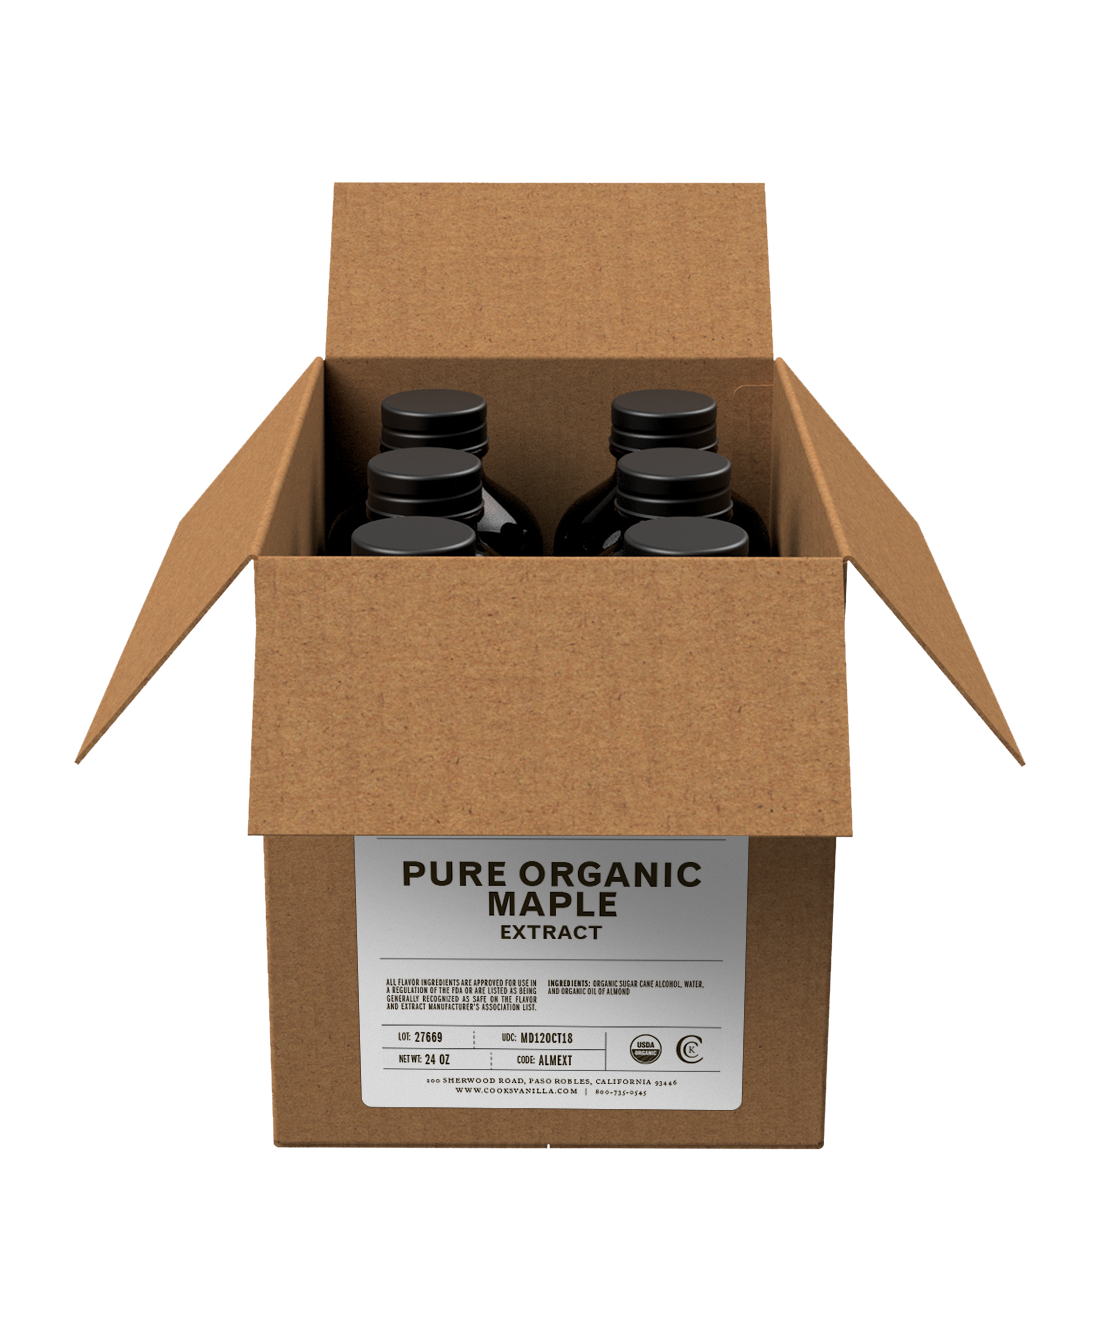 Flavoring | Organic Maple Extract (Pure) | Packs and Cases